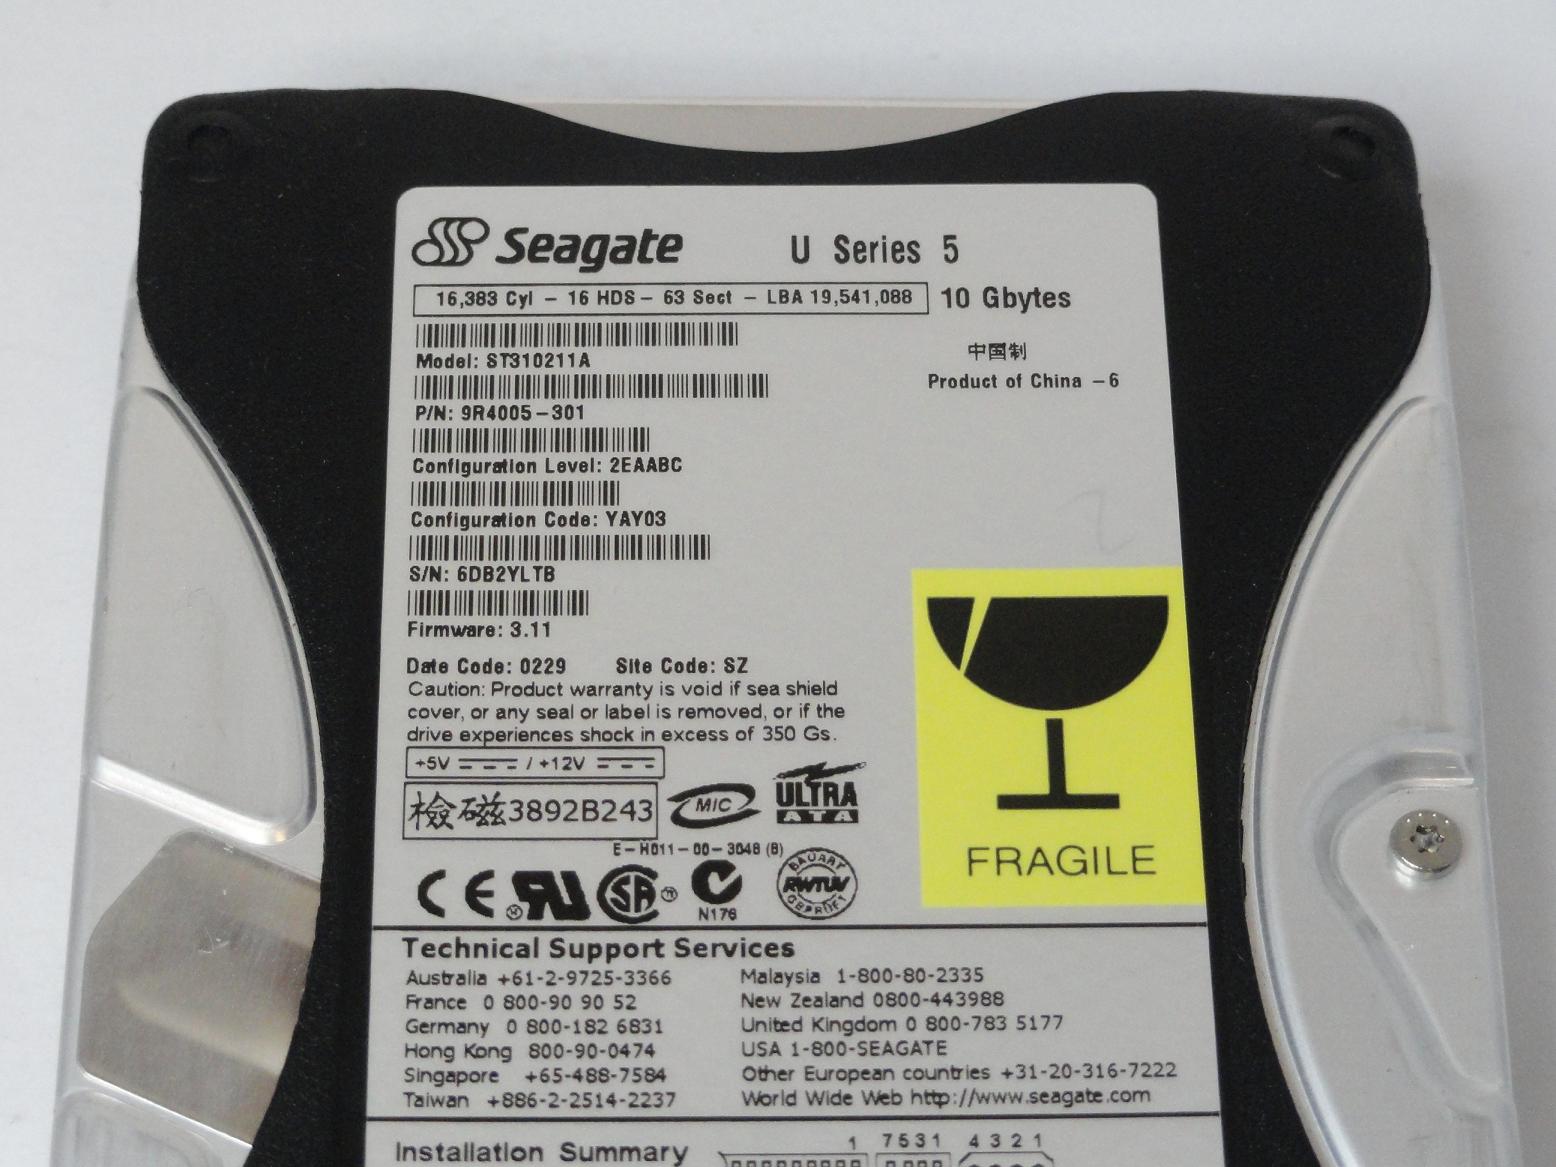 Seagate 10GB IDE 5400rpm 3.5in HDD ( 9R4005-301 ST310211A ) ASIS